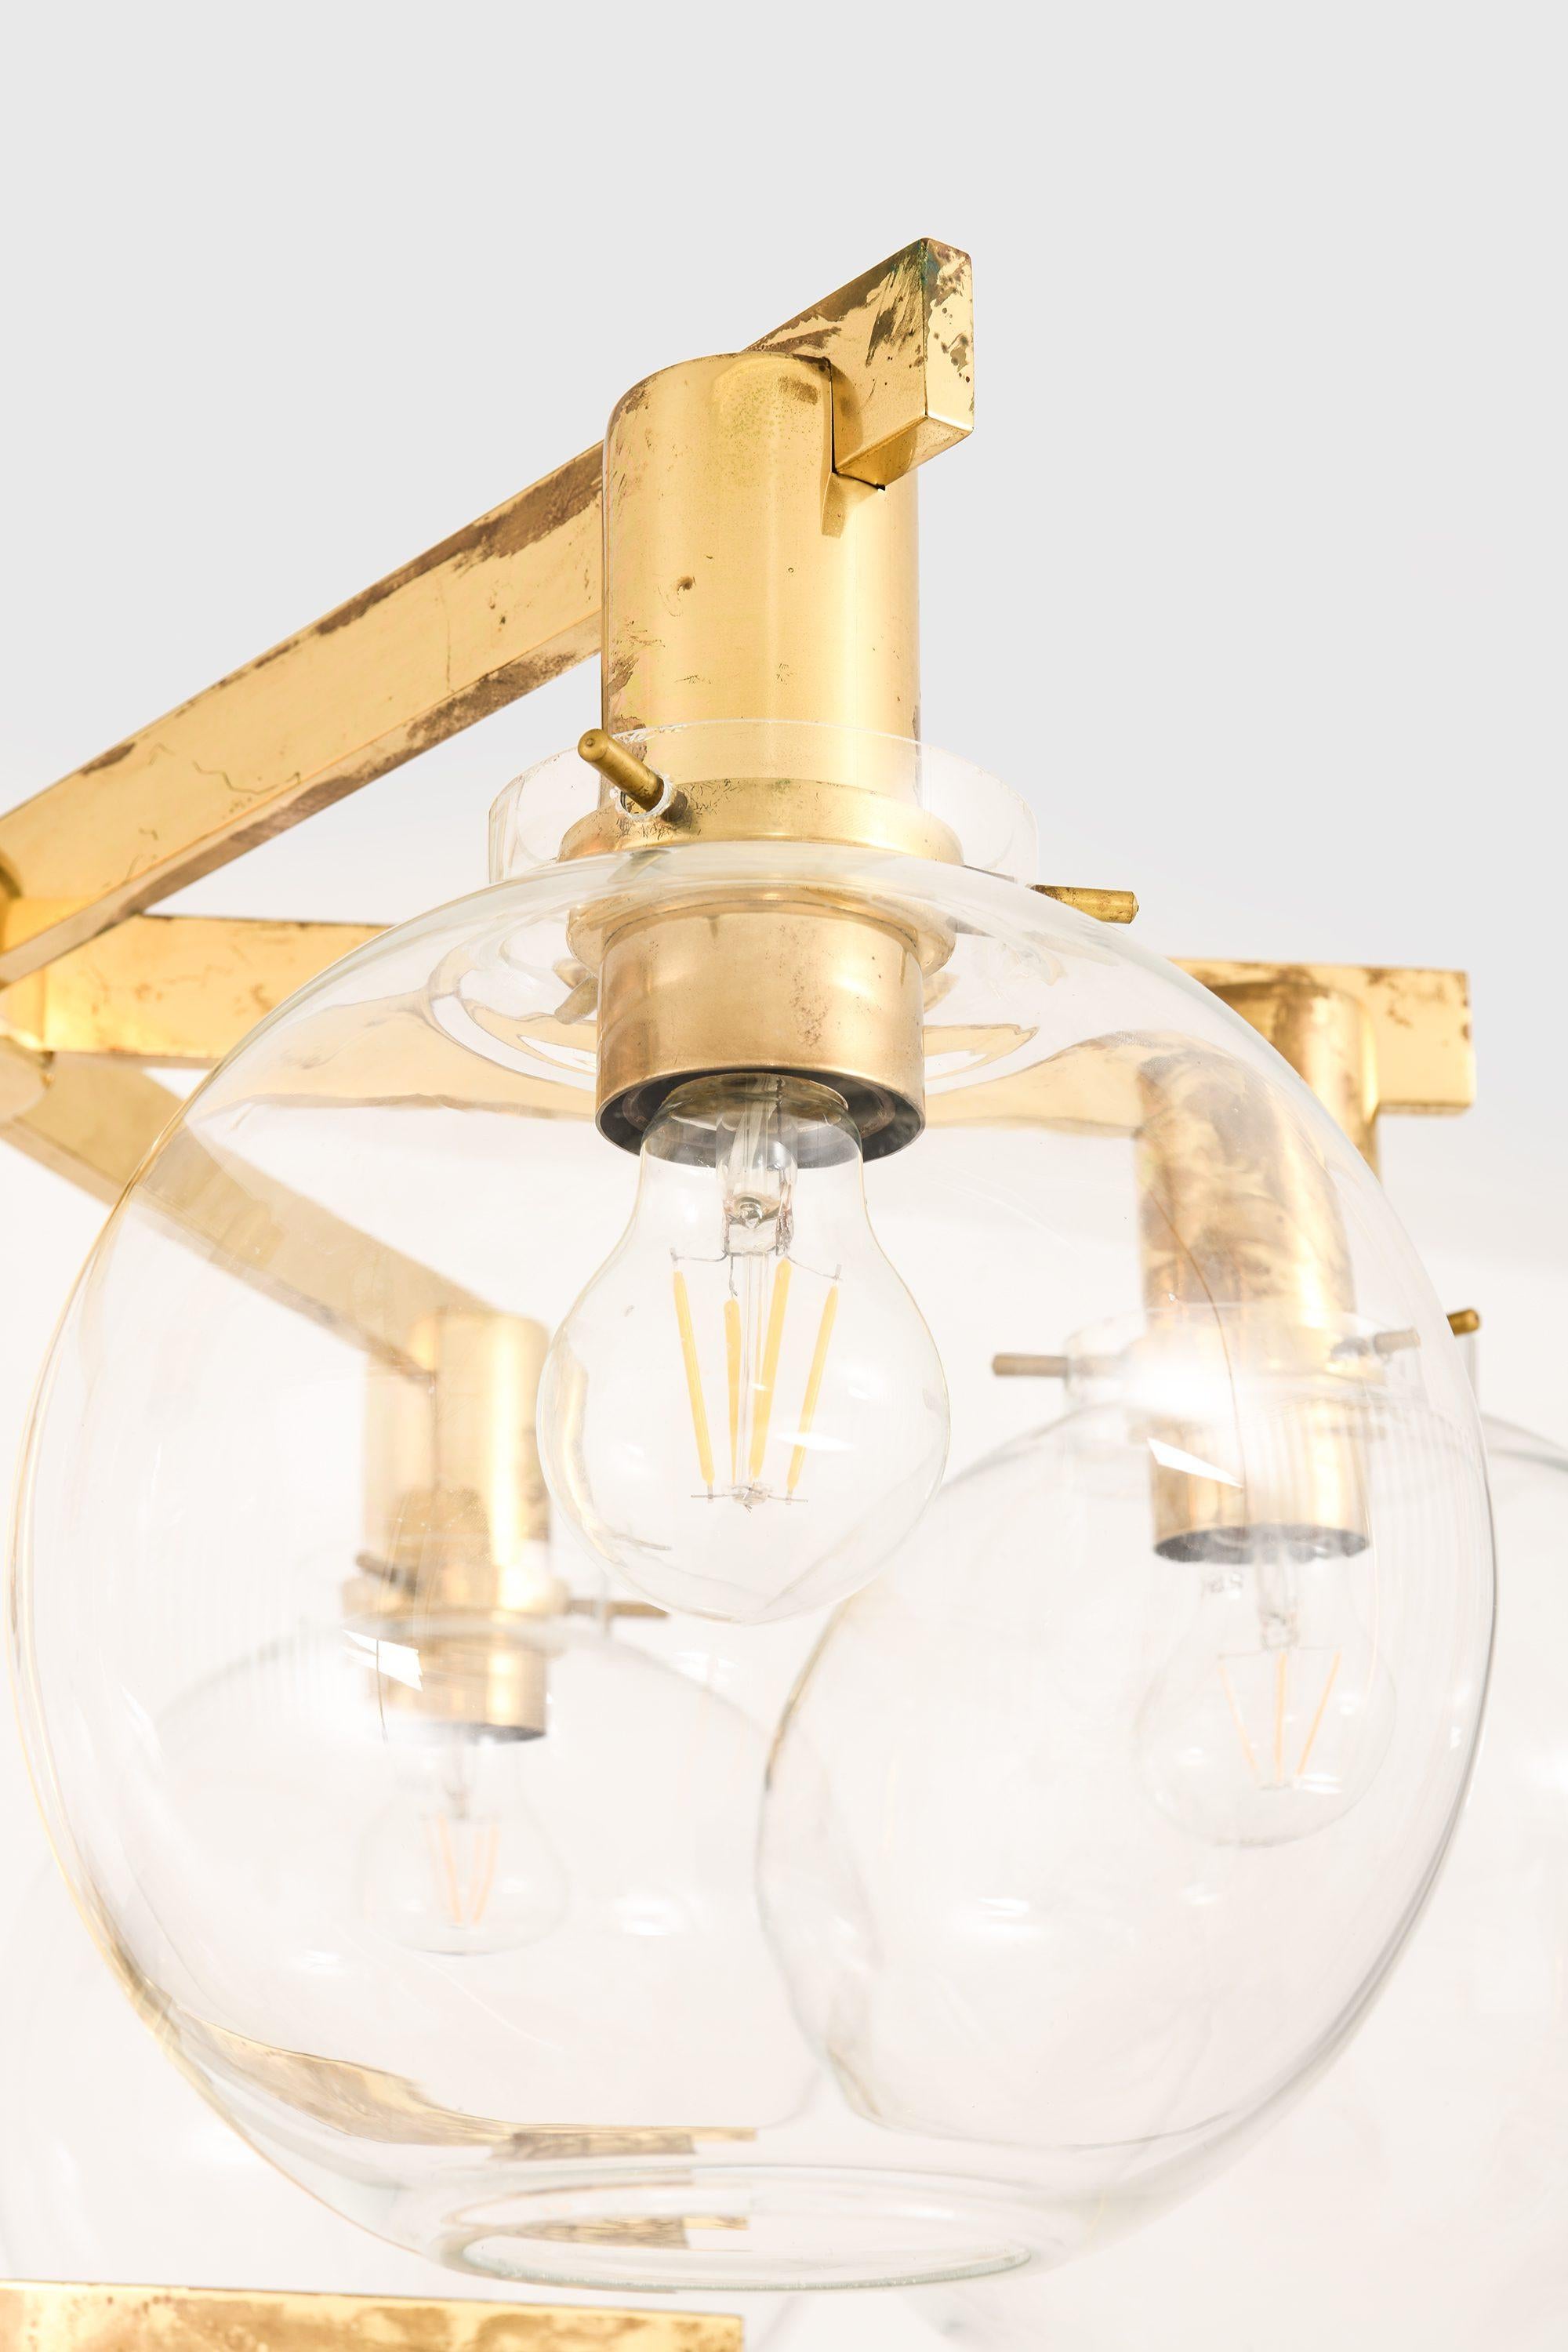 Scandinavian Modern Small Ceiling Lamp Chandelier in Brass and Glass by Hans-Agne Jakobsson, 1950's For Sale